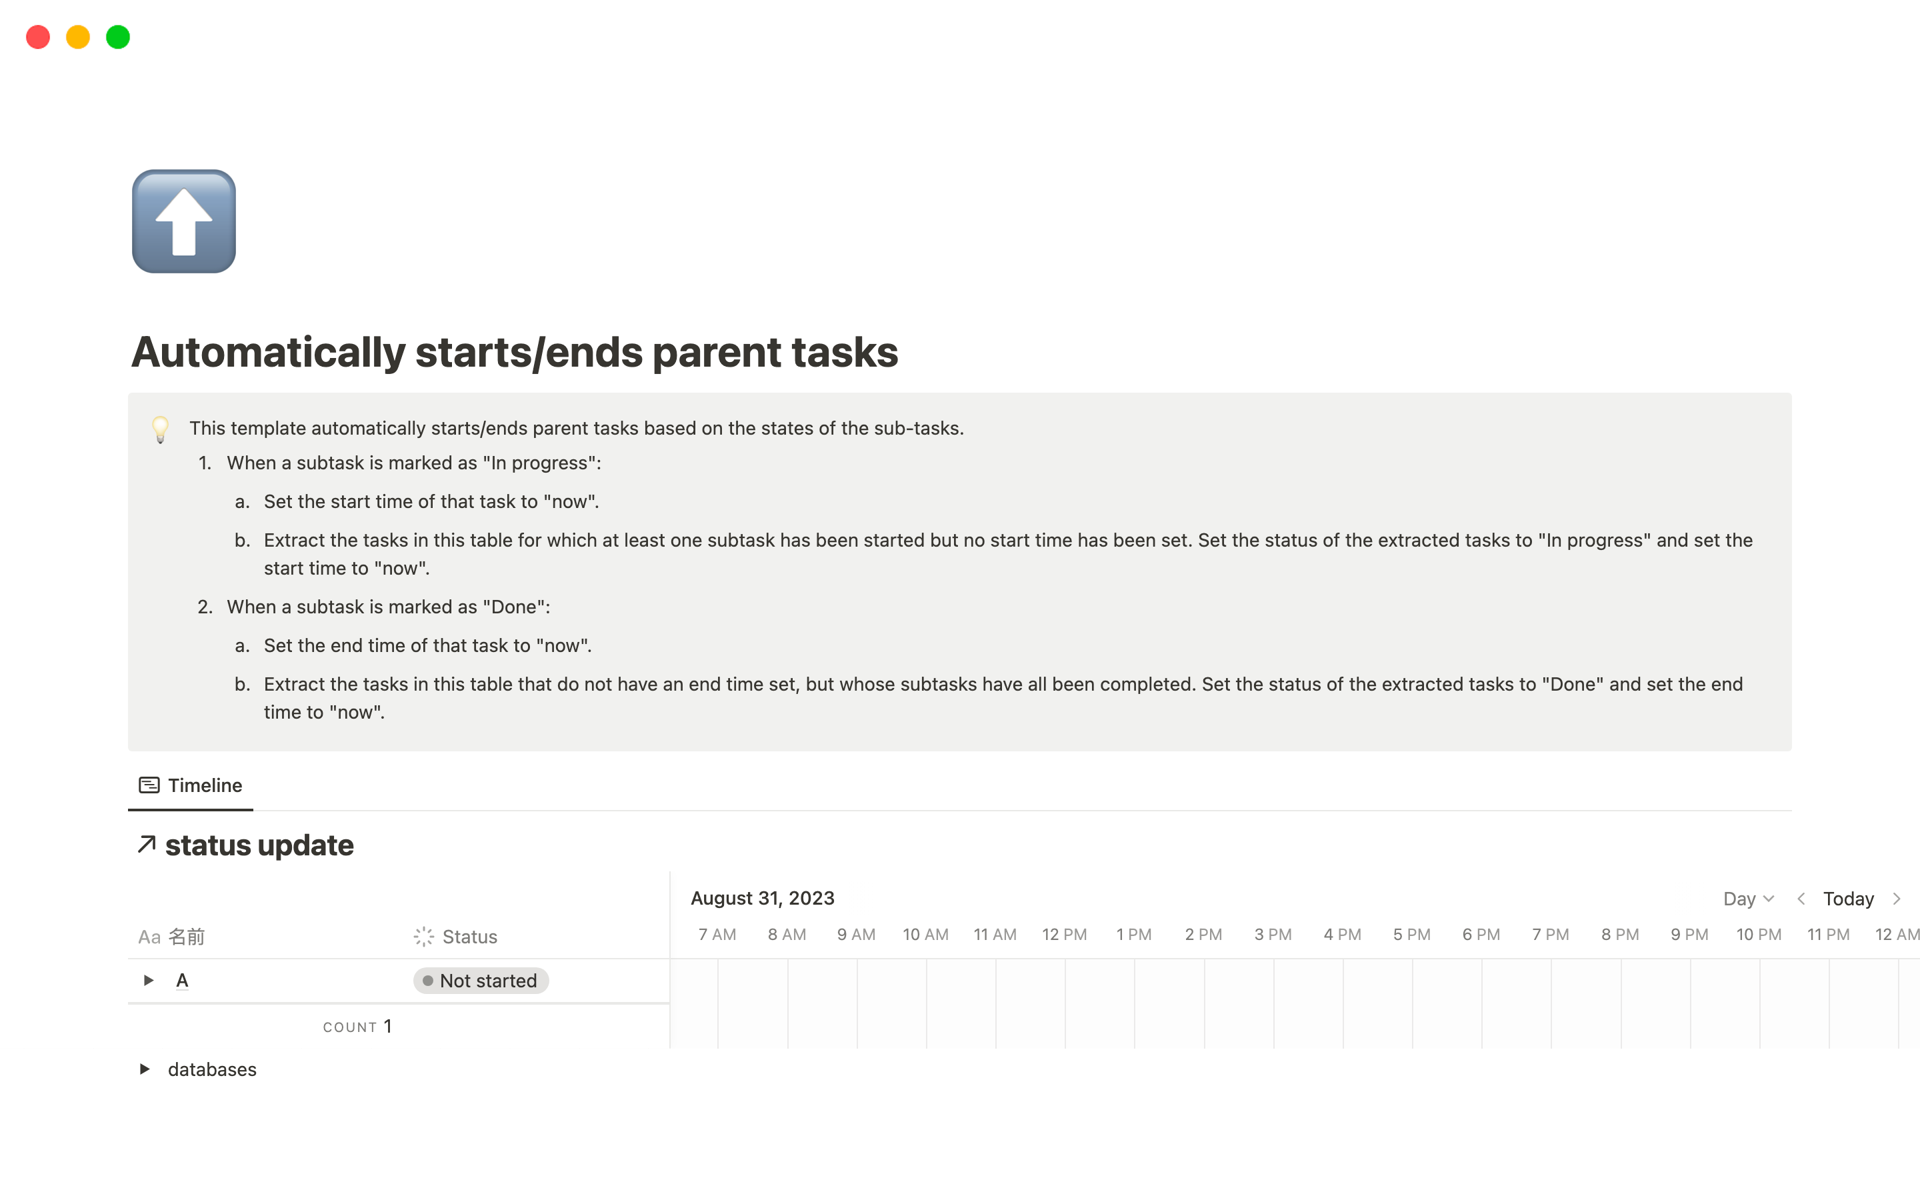 This template automatically starts/ends parent tasks based on the states of the sub-tasks.